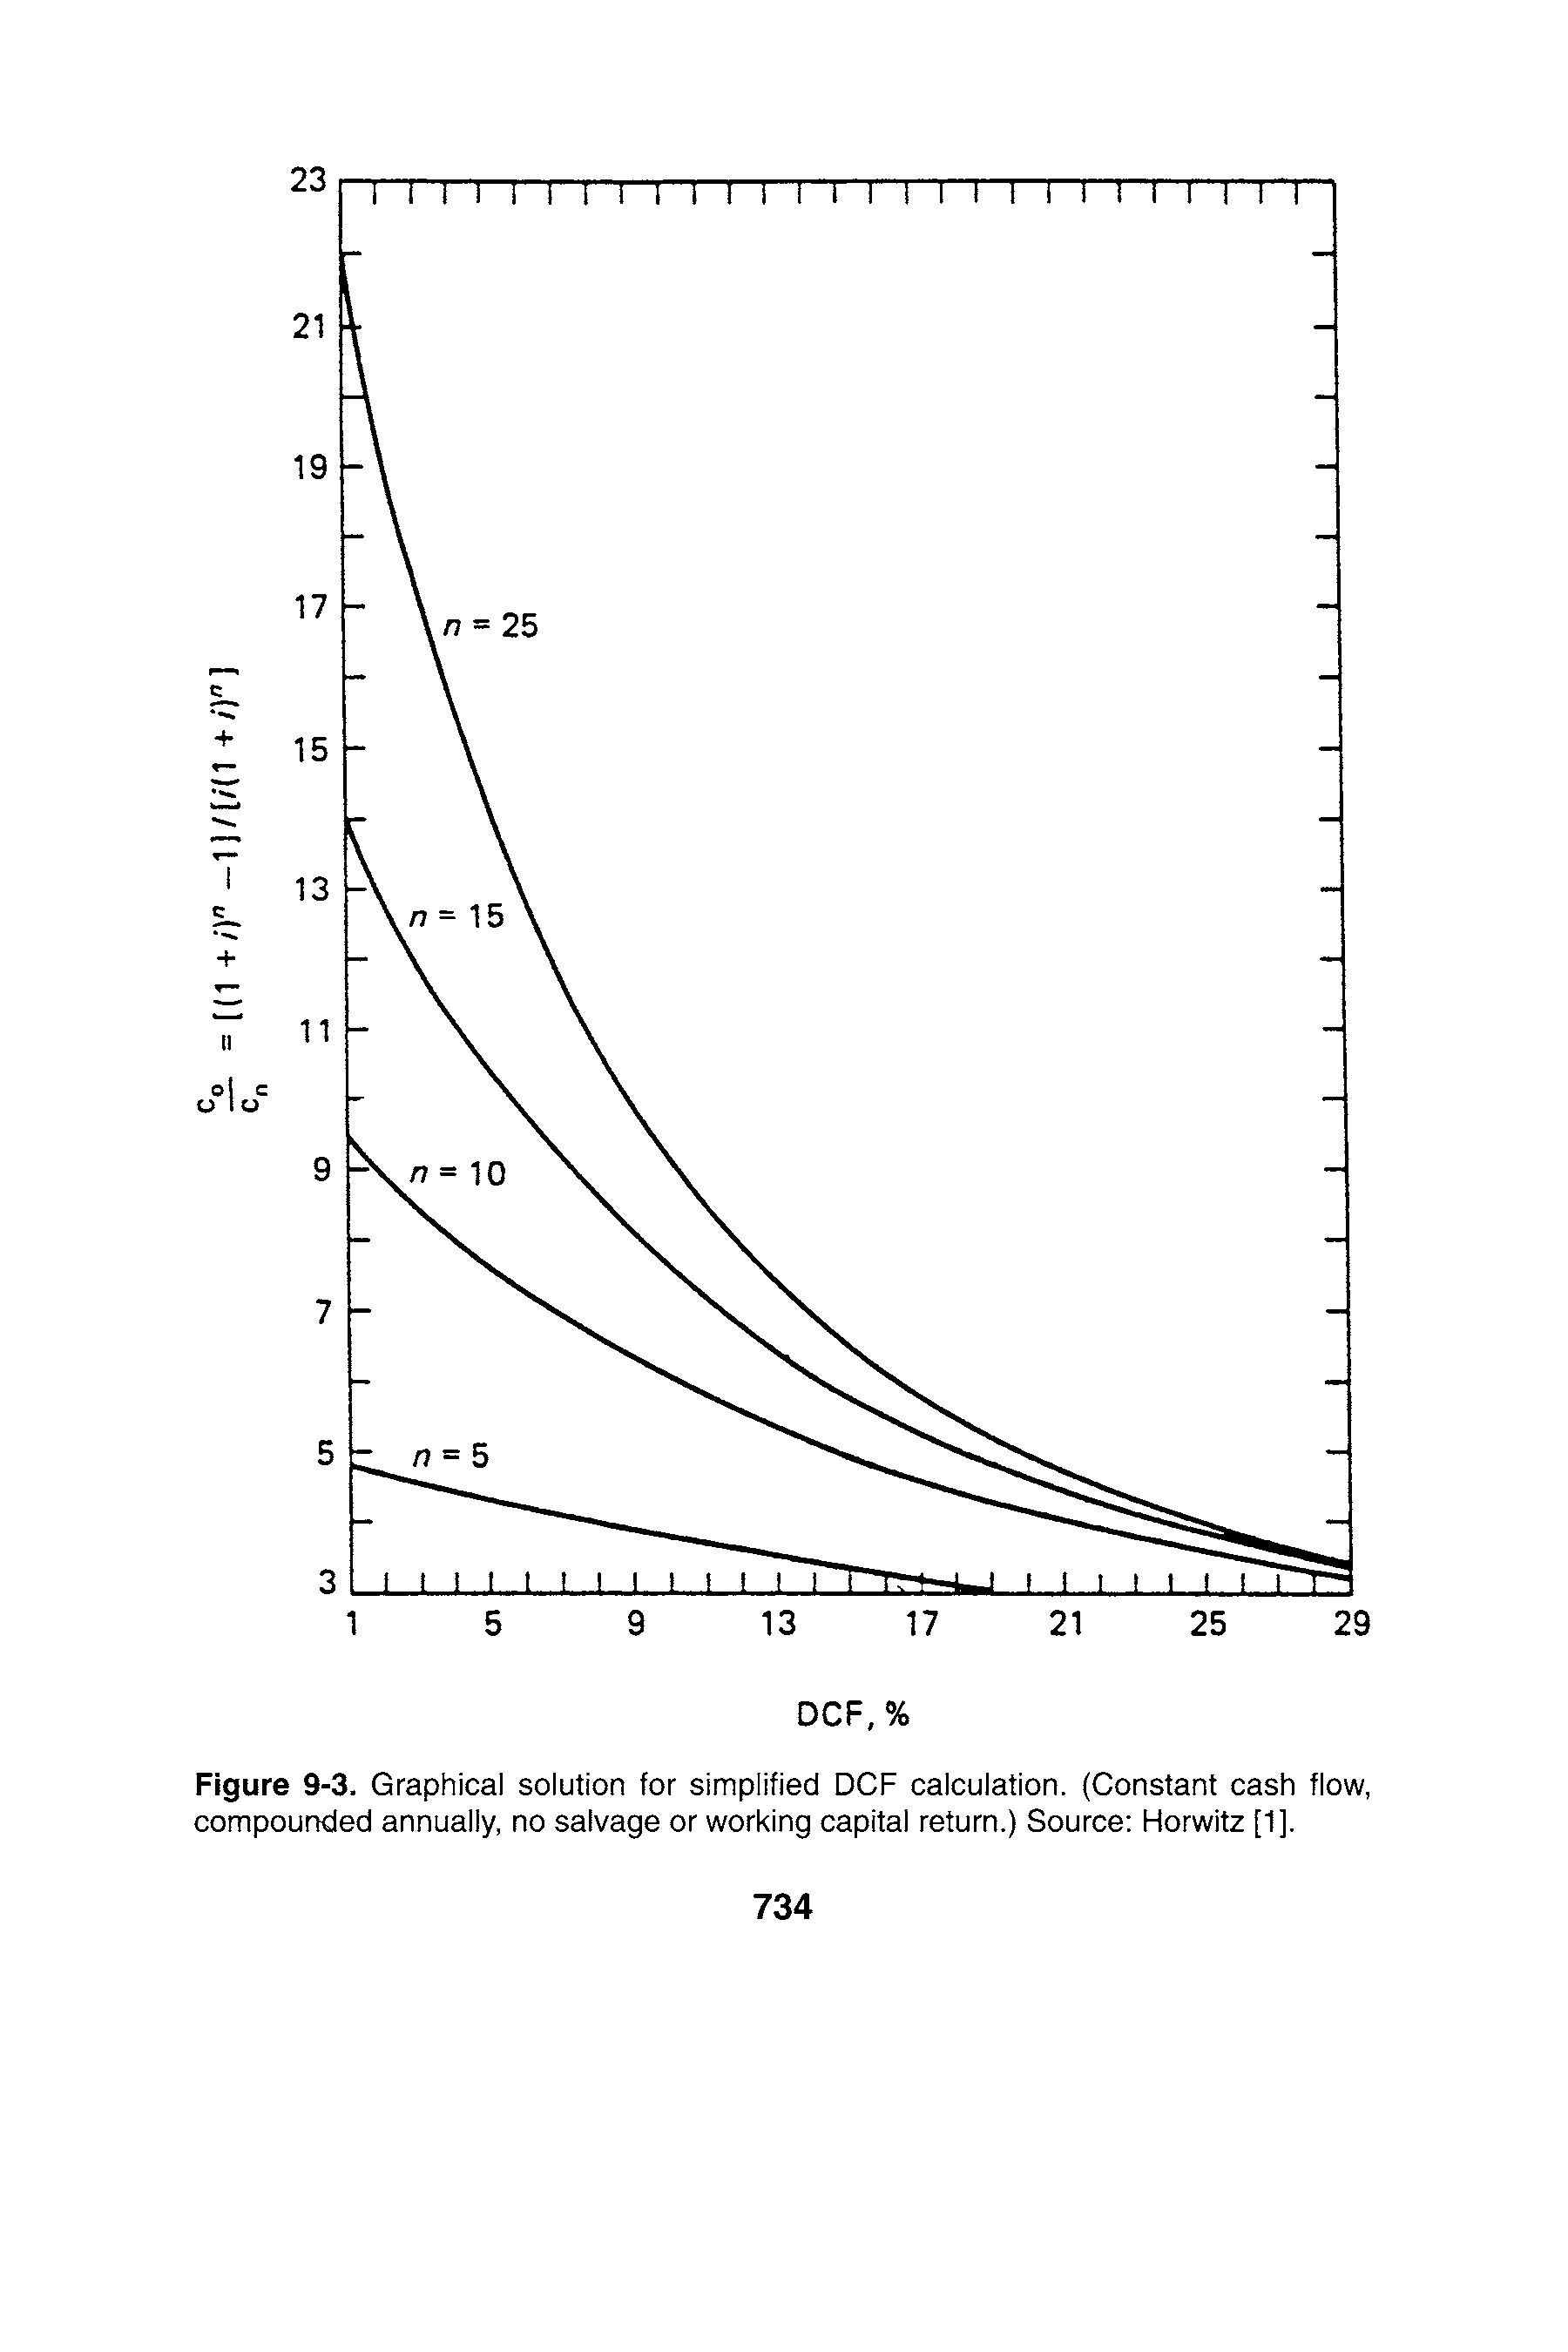 Figure 9-3. Graphical solution for simplified DCF calculation. (Constant cash flow, compounded annually, no salvage or working capital return.) Source Horwitz [1].